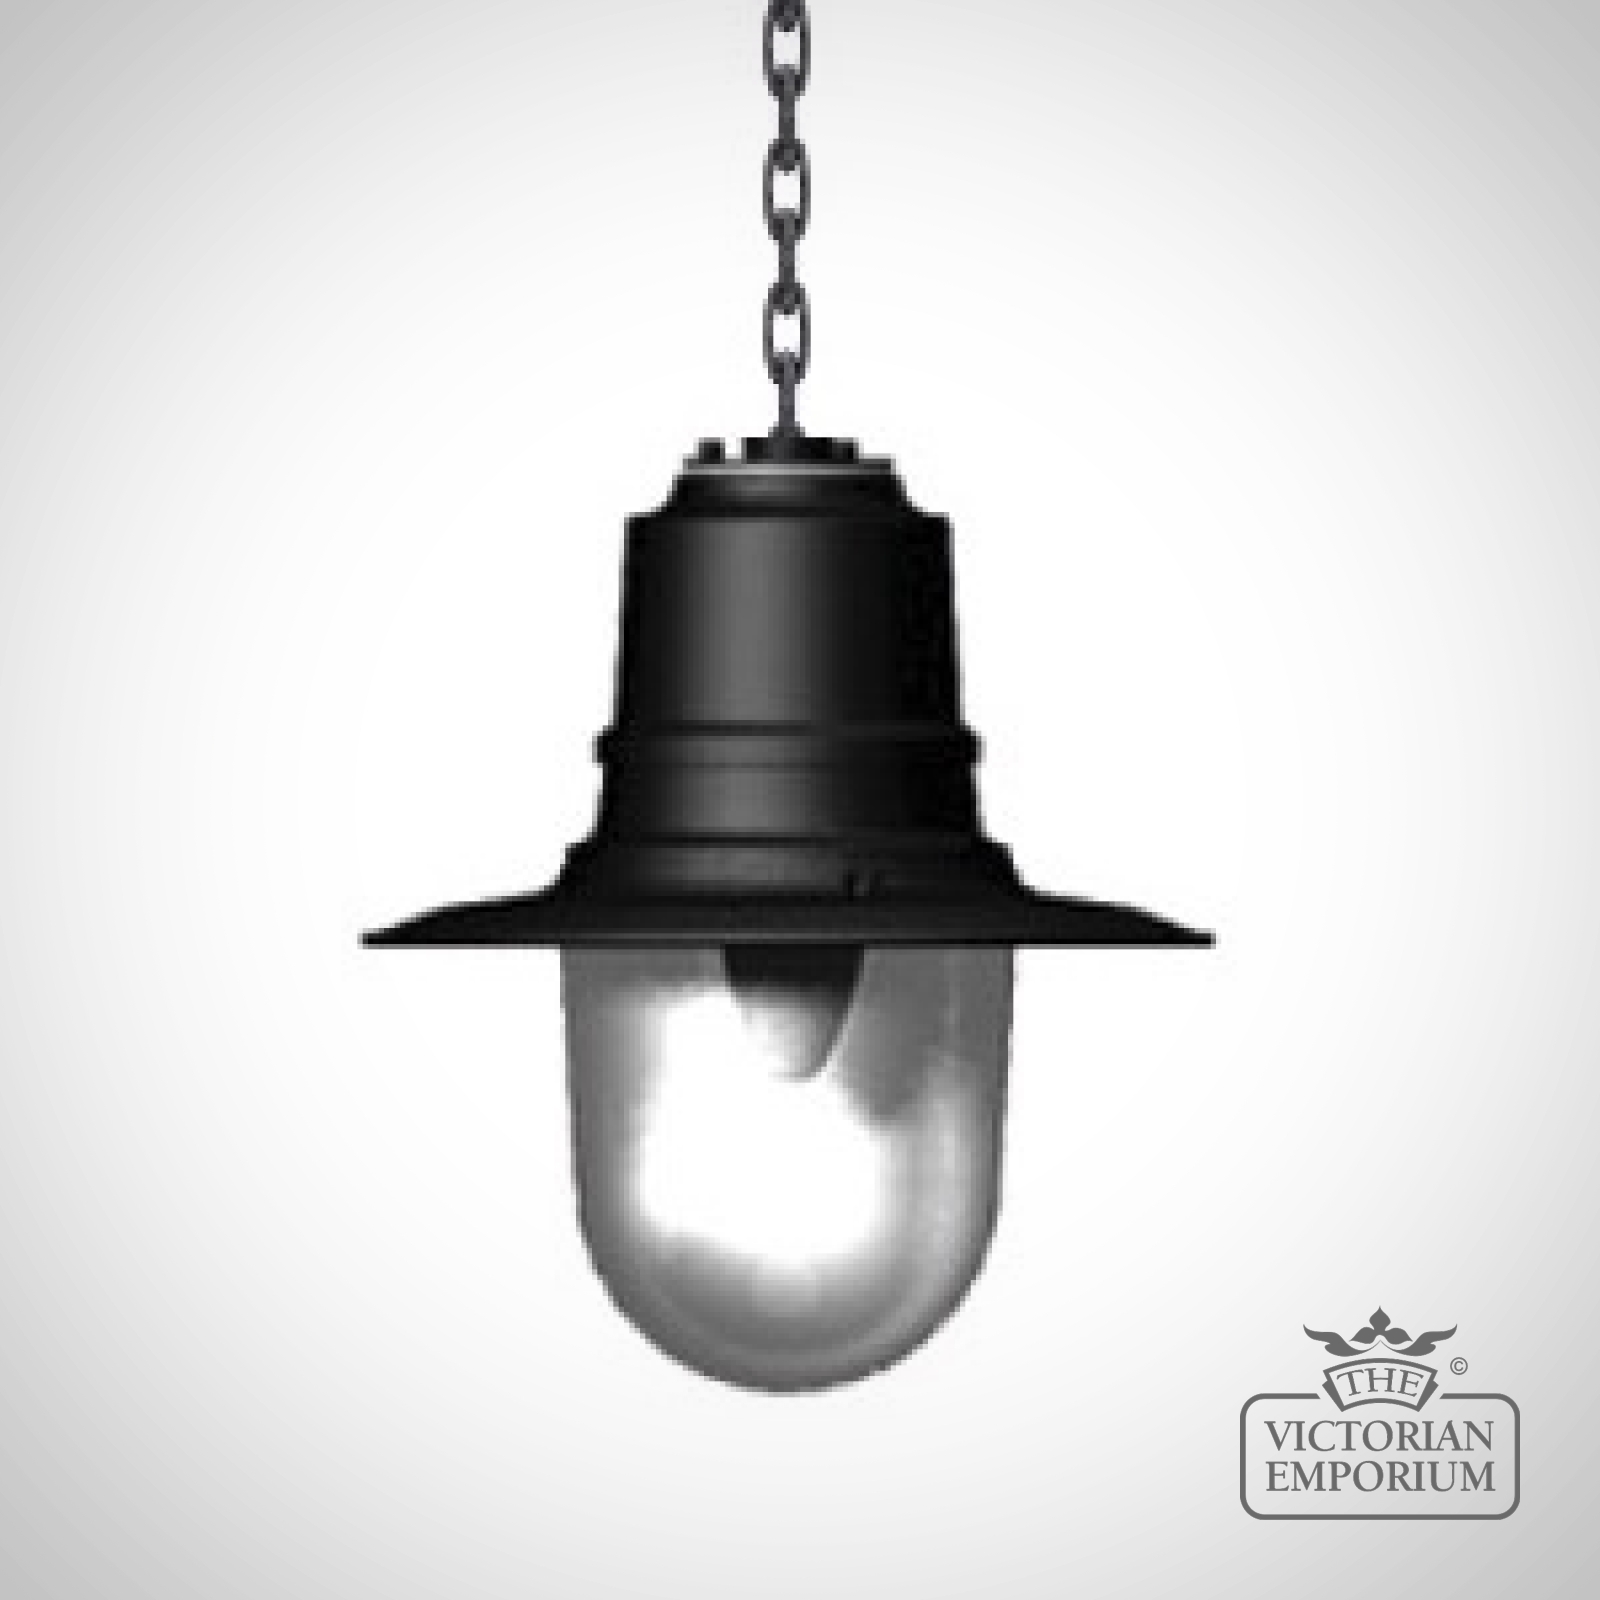 Station Master Lantern on chain in a choice of 2 sizes